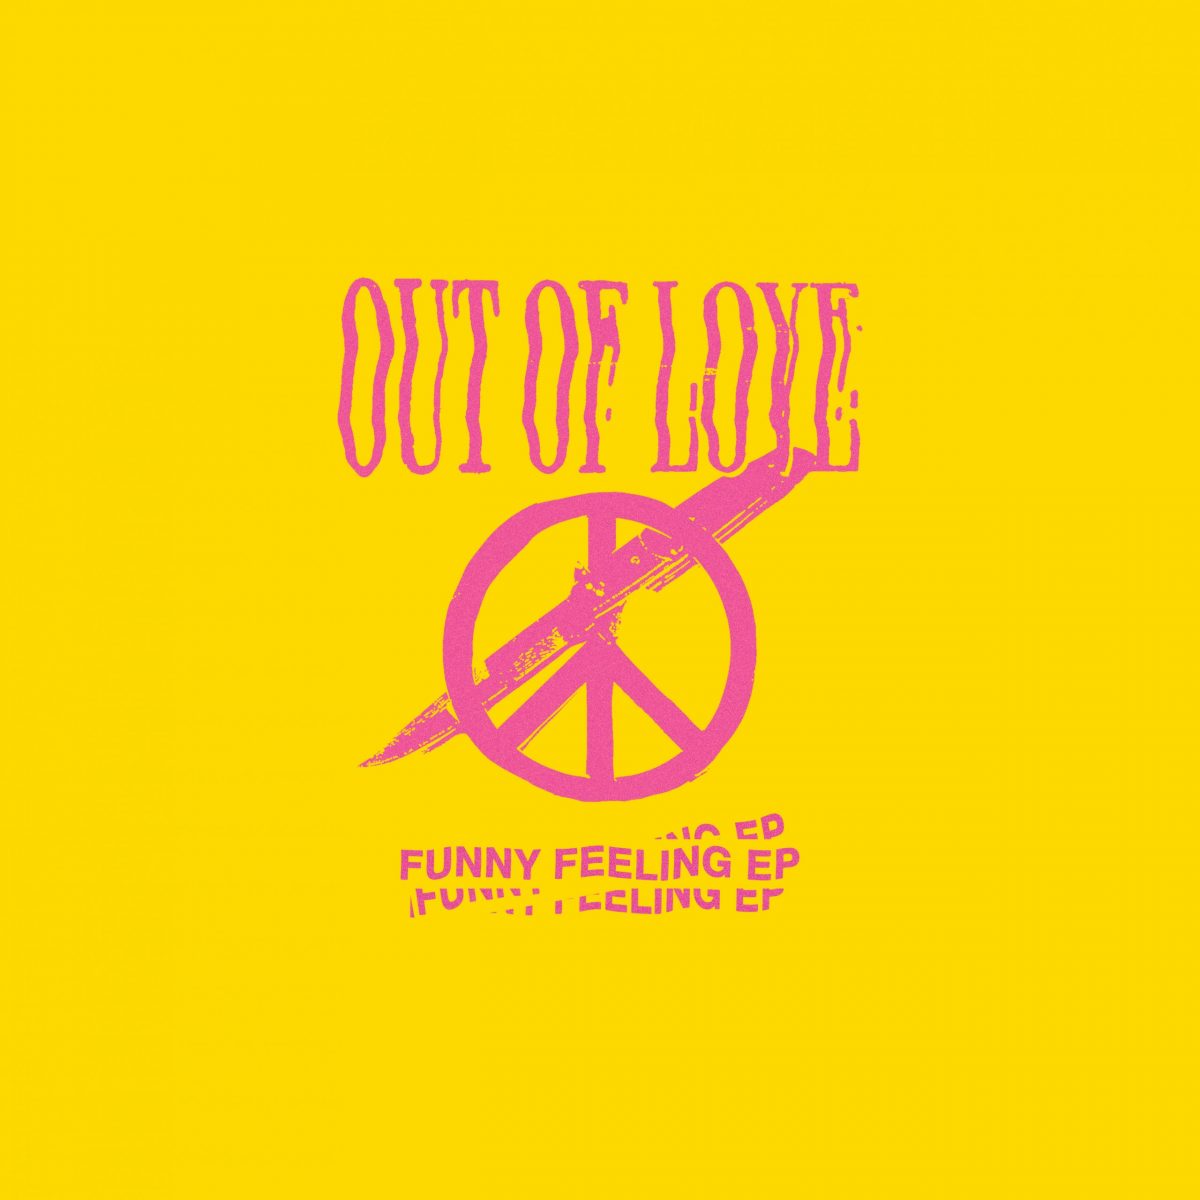 out-of-love-funny-feeling-ep-review